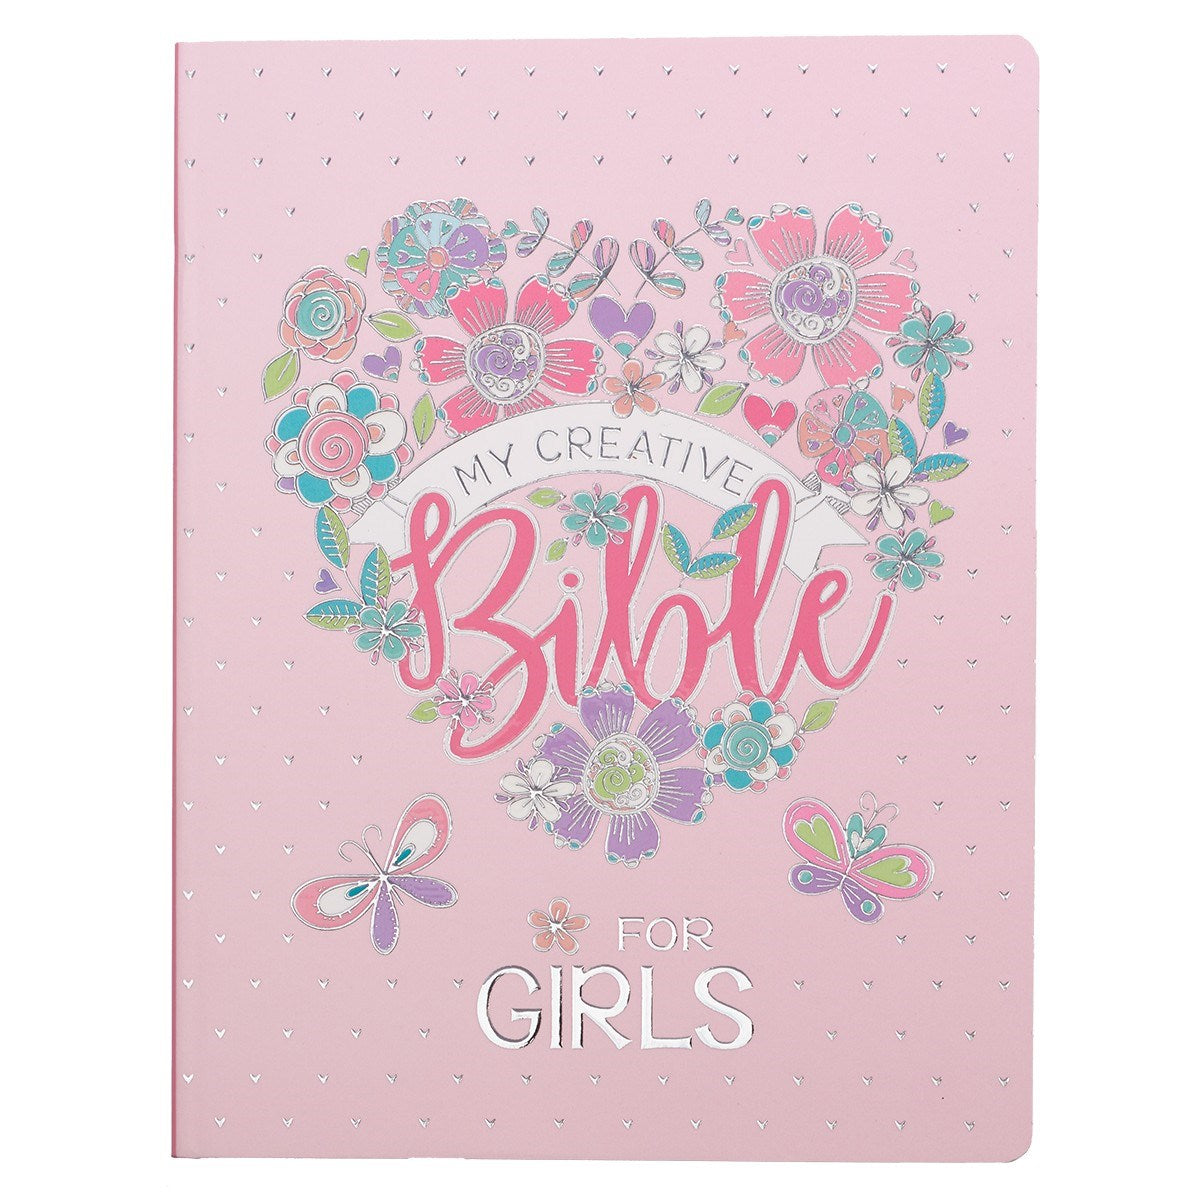 Seed of Abraham Christian Bookstore - (In)Courage - ESV My Creative Bible For Girls-Pink Softcover